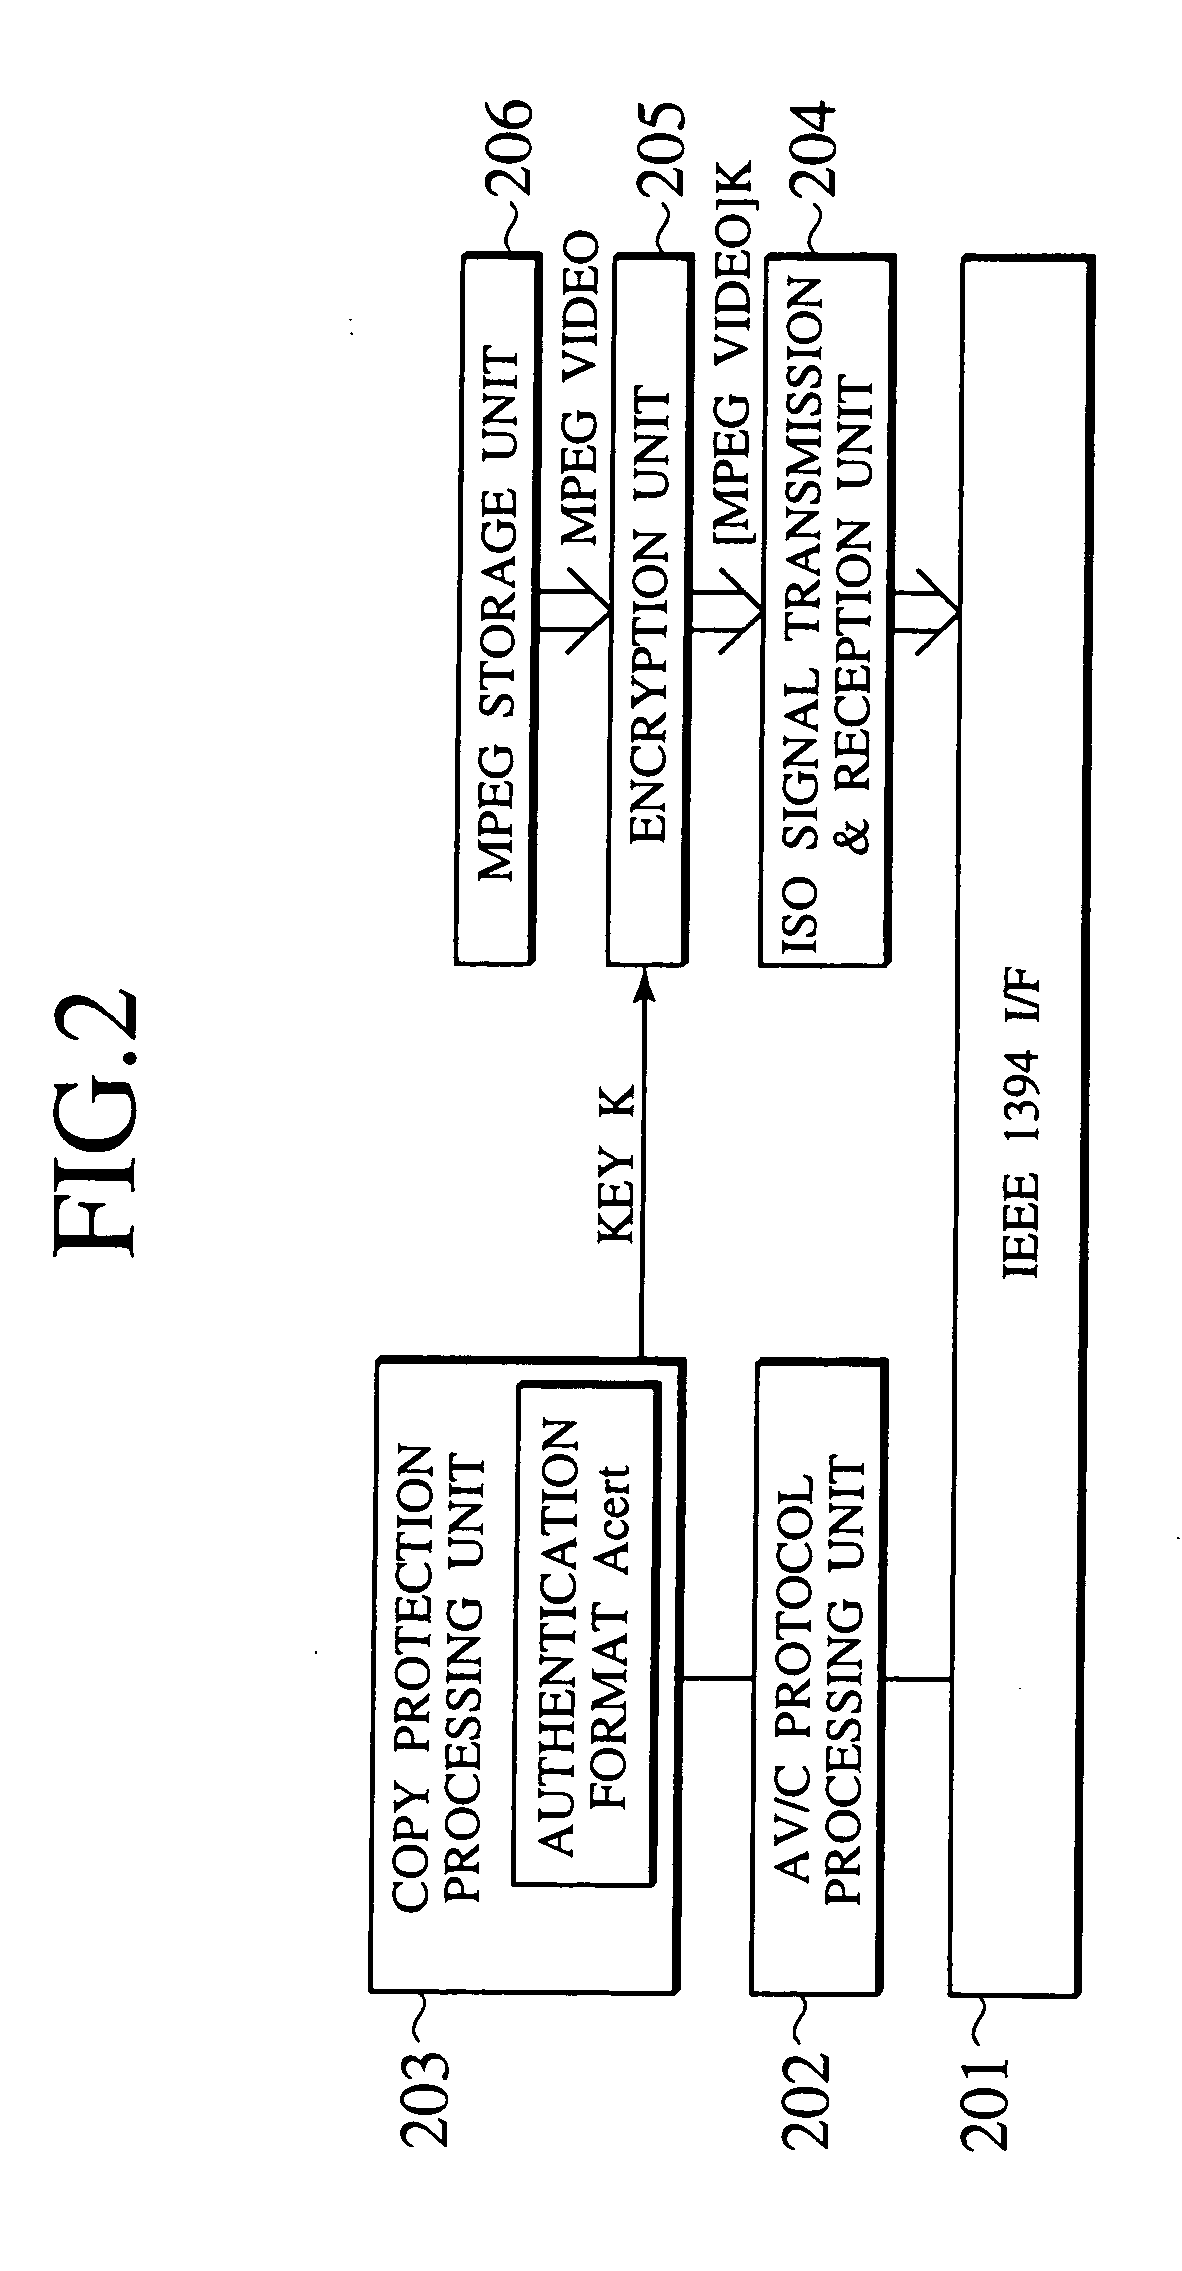 Network connection device, network connection method, and communication device realizing contents protection procedure over networks